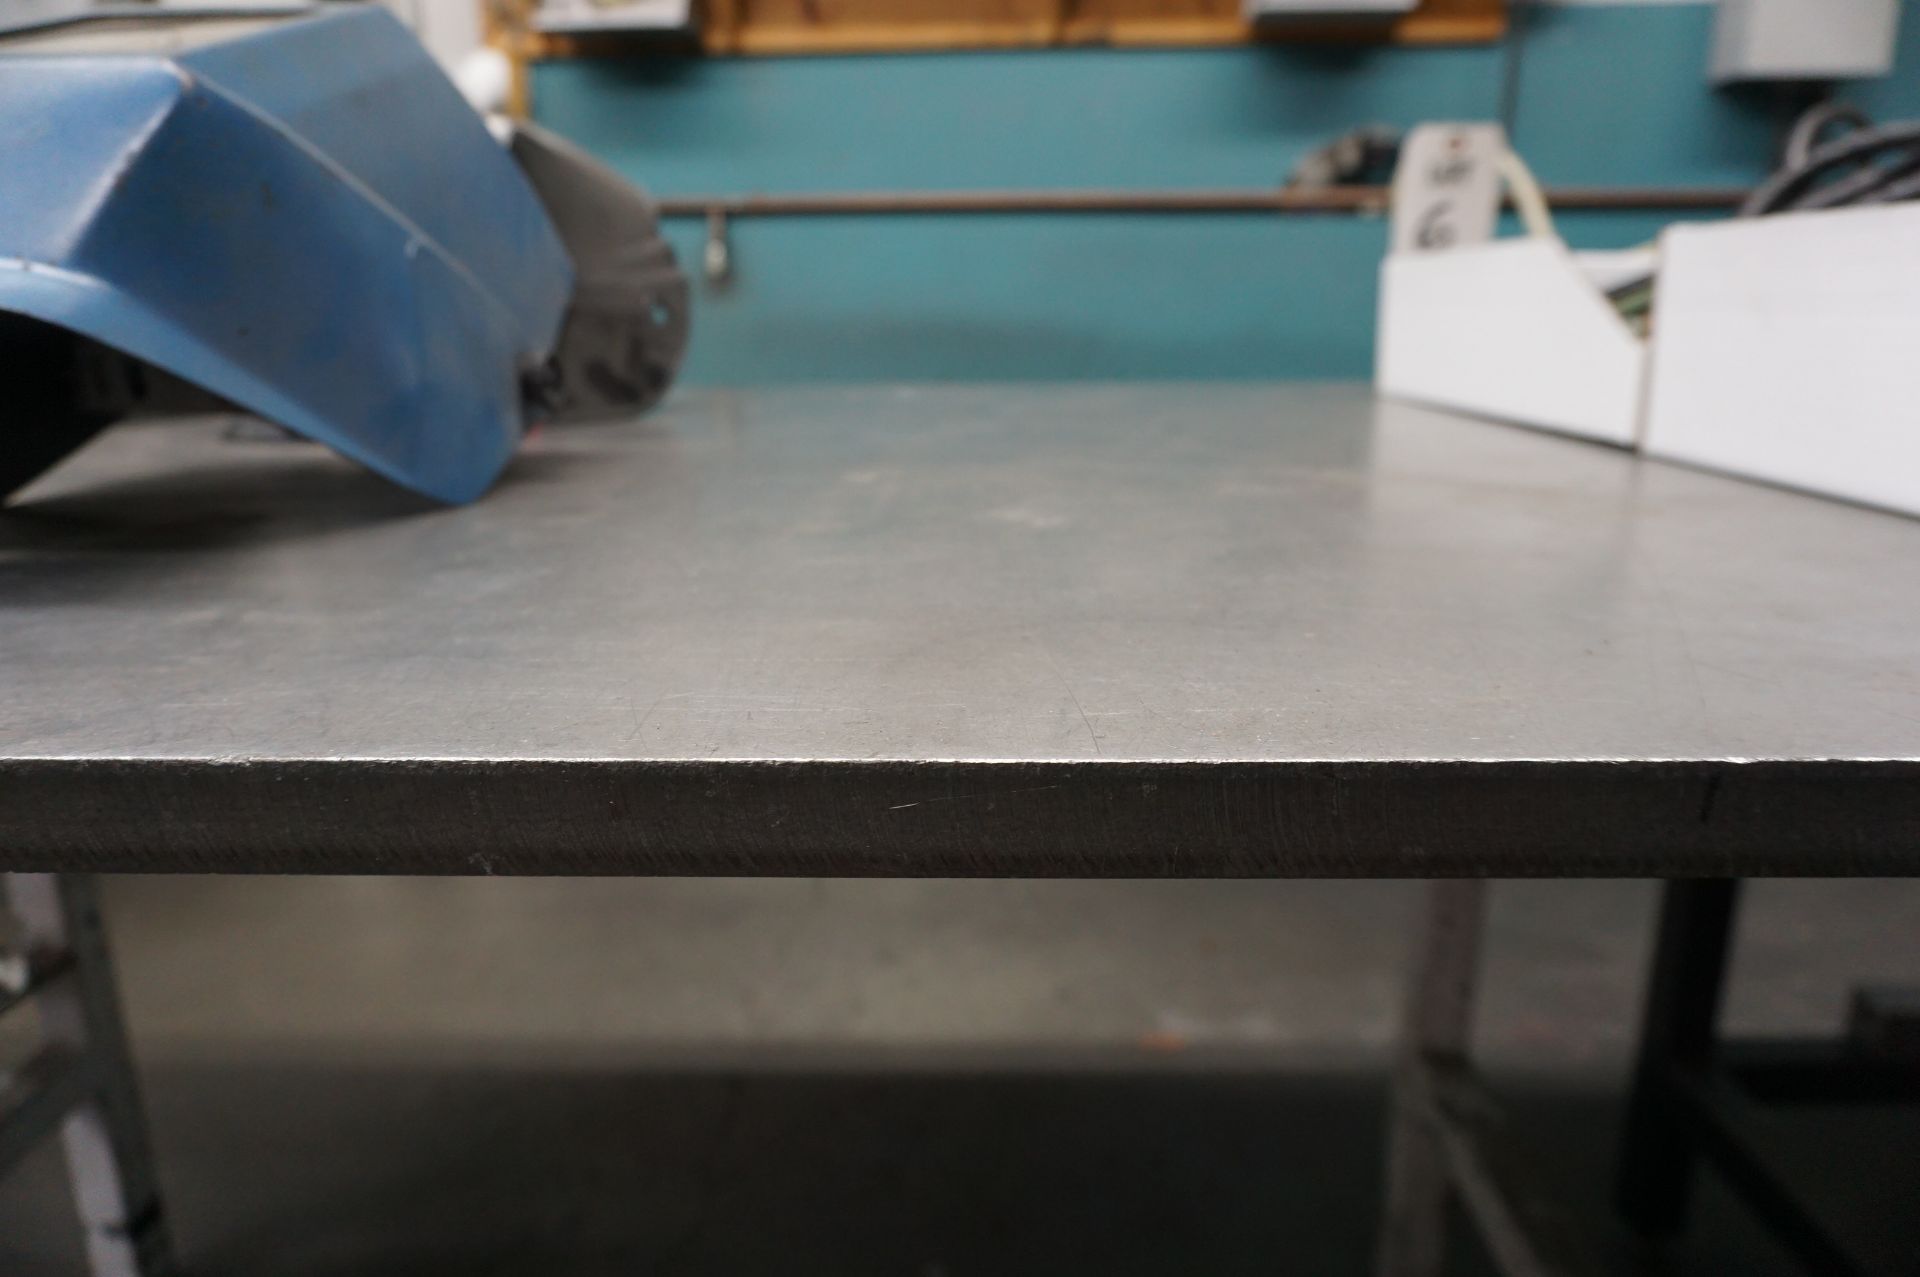 LOT TO INCLUDE: (1) TABLE USED FOR TIG WELDING. 42" X 72" WORKING AREA, 1" THICK HEAVY STEEL TOP, - Image 3 of 5